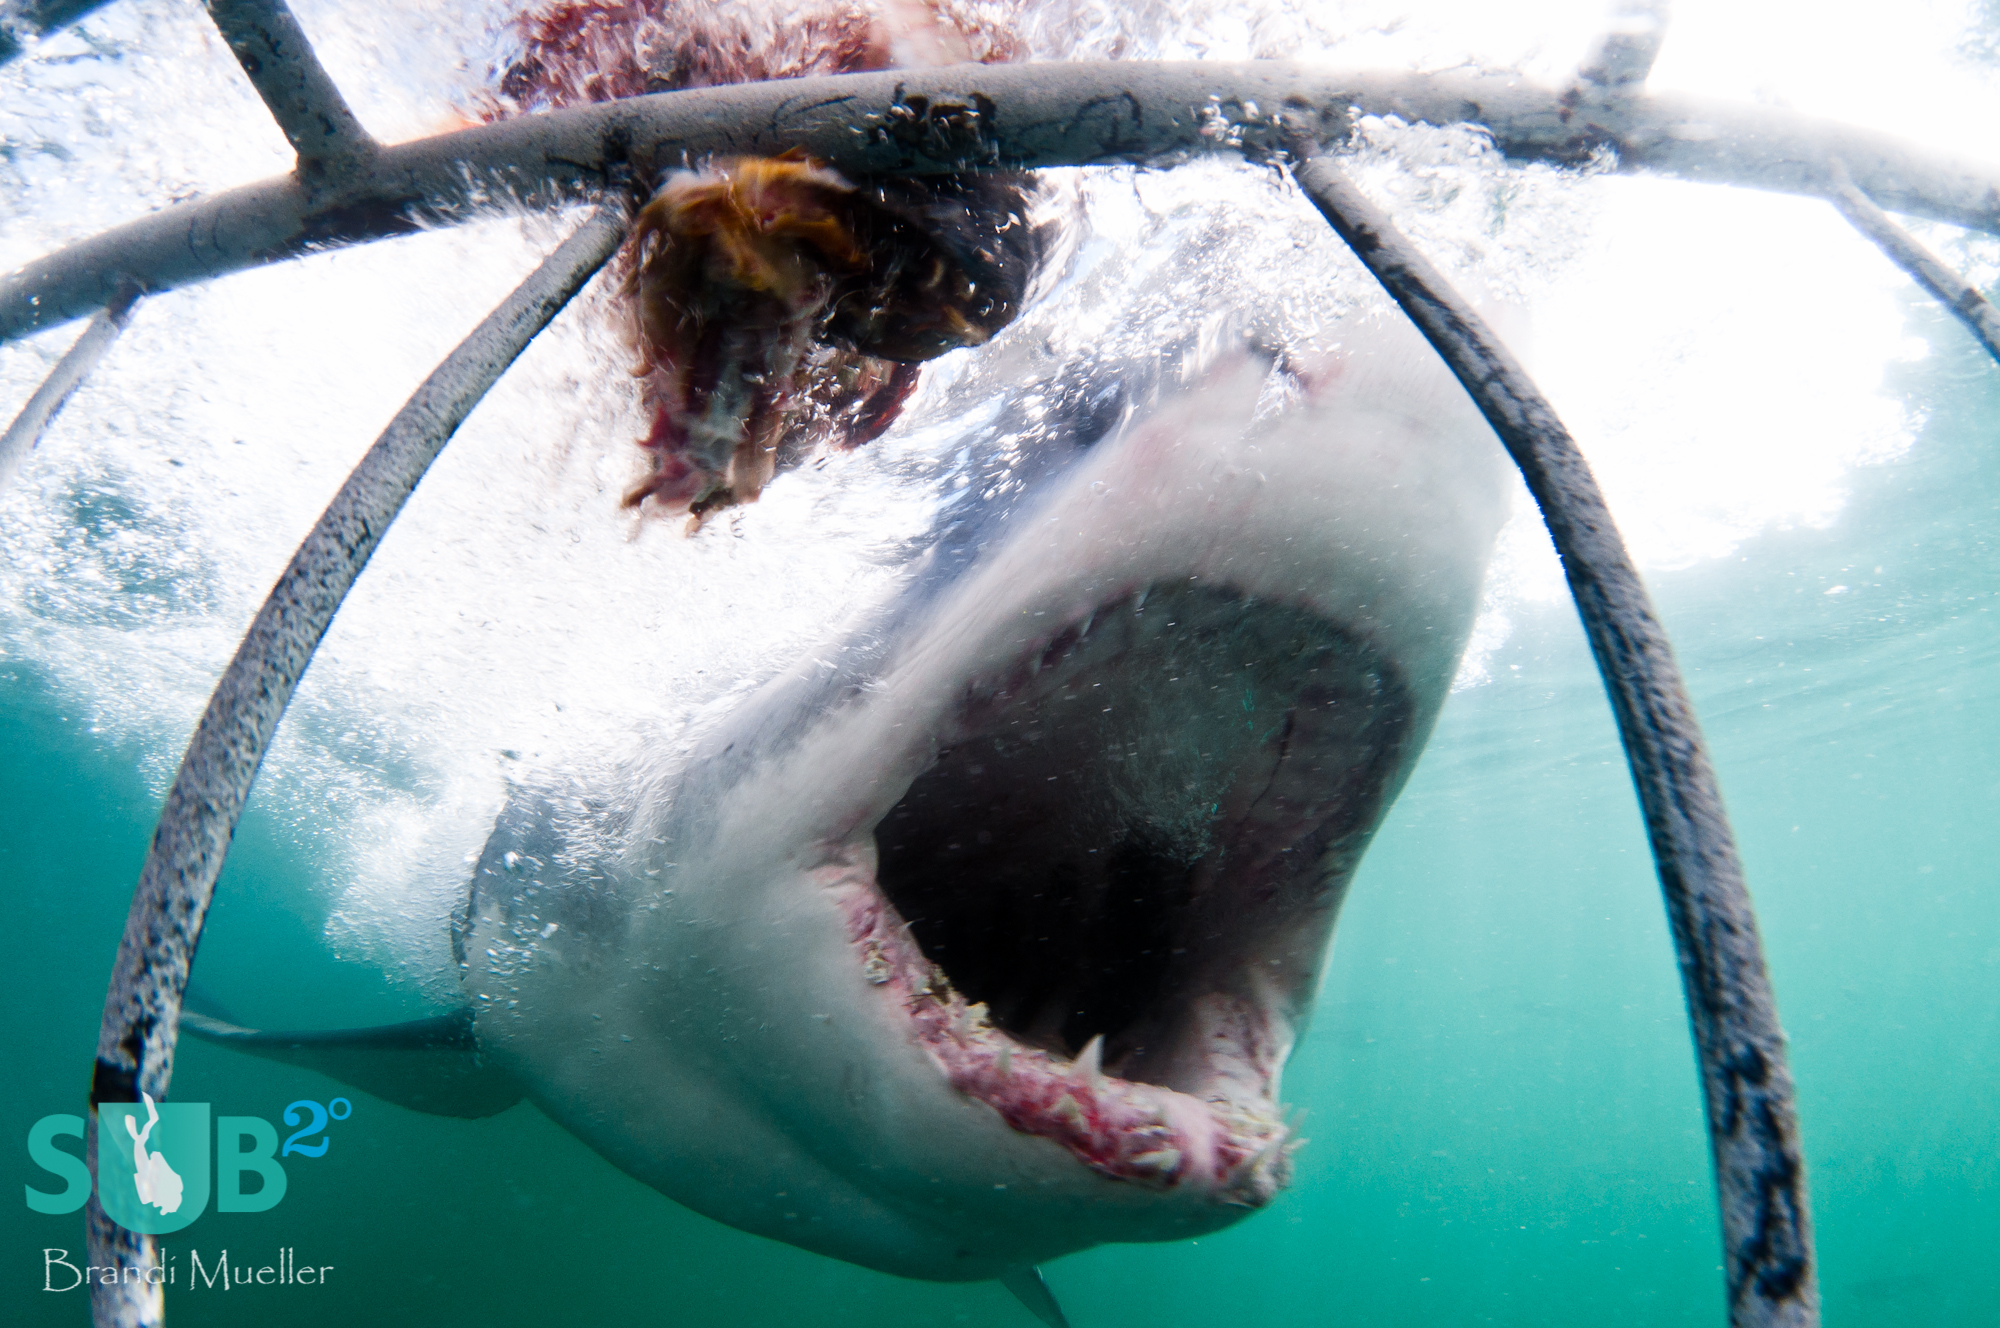 With its mouth wide open, this great white shark smiles for the camera.